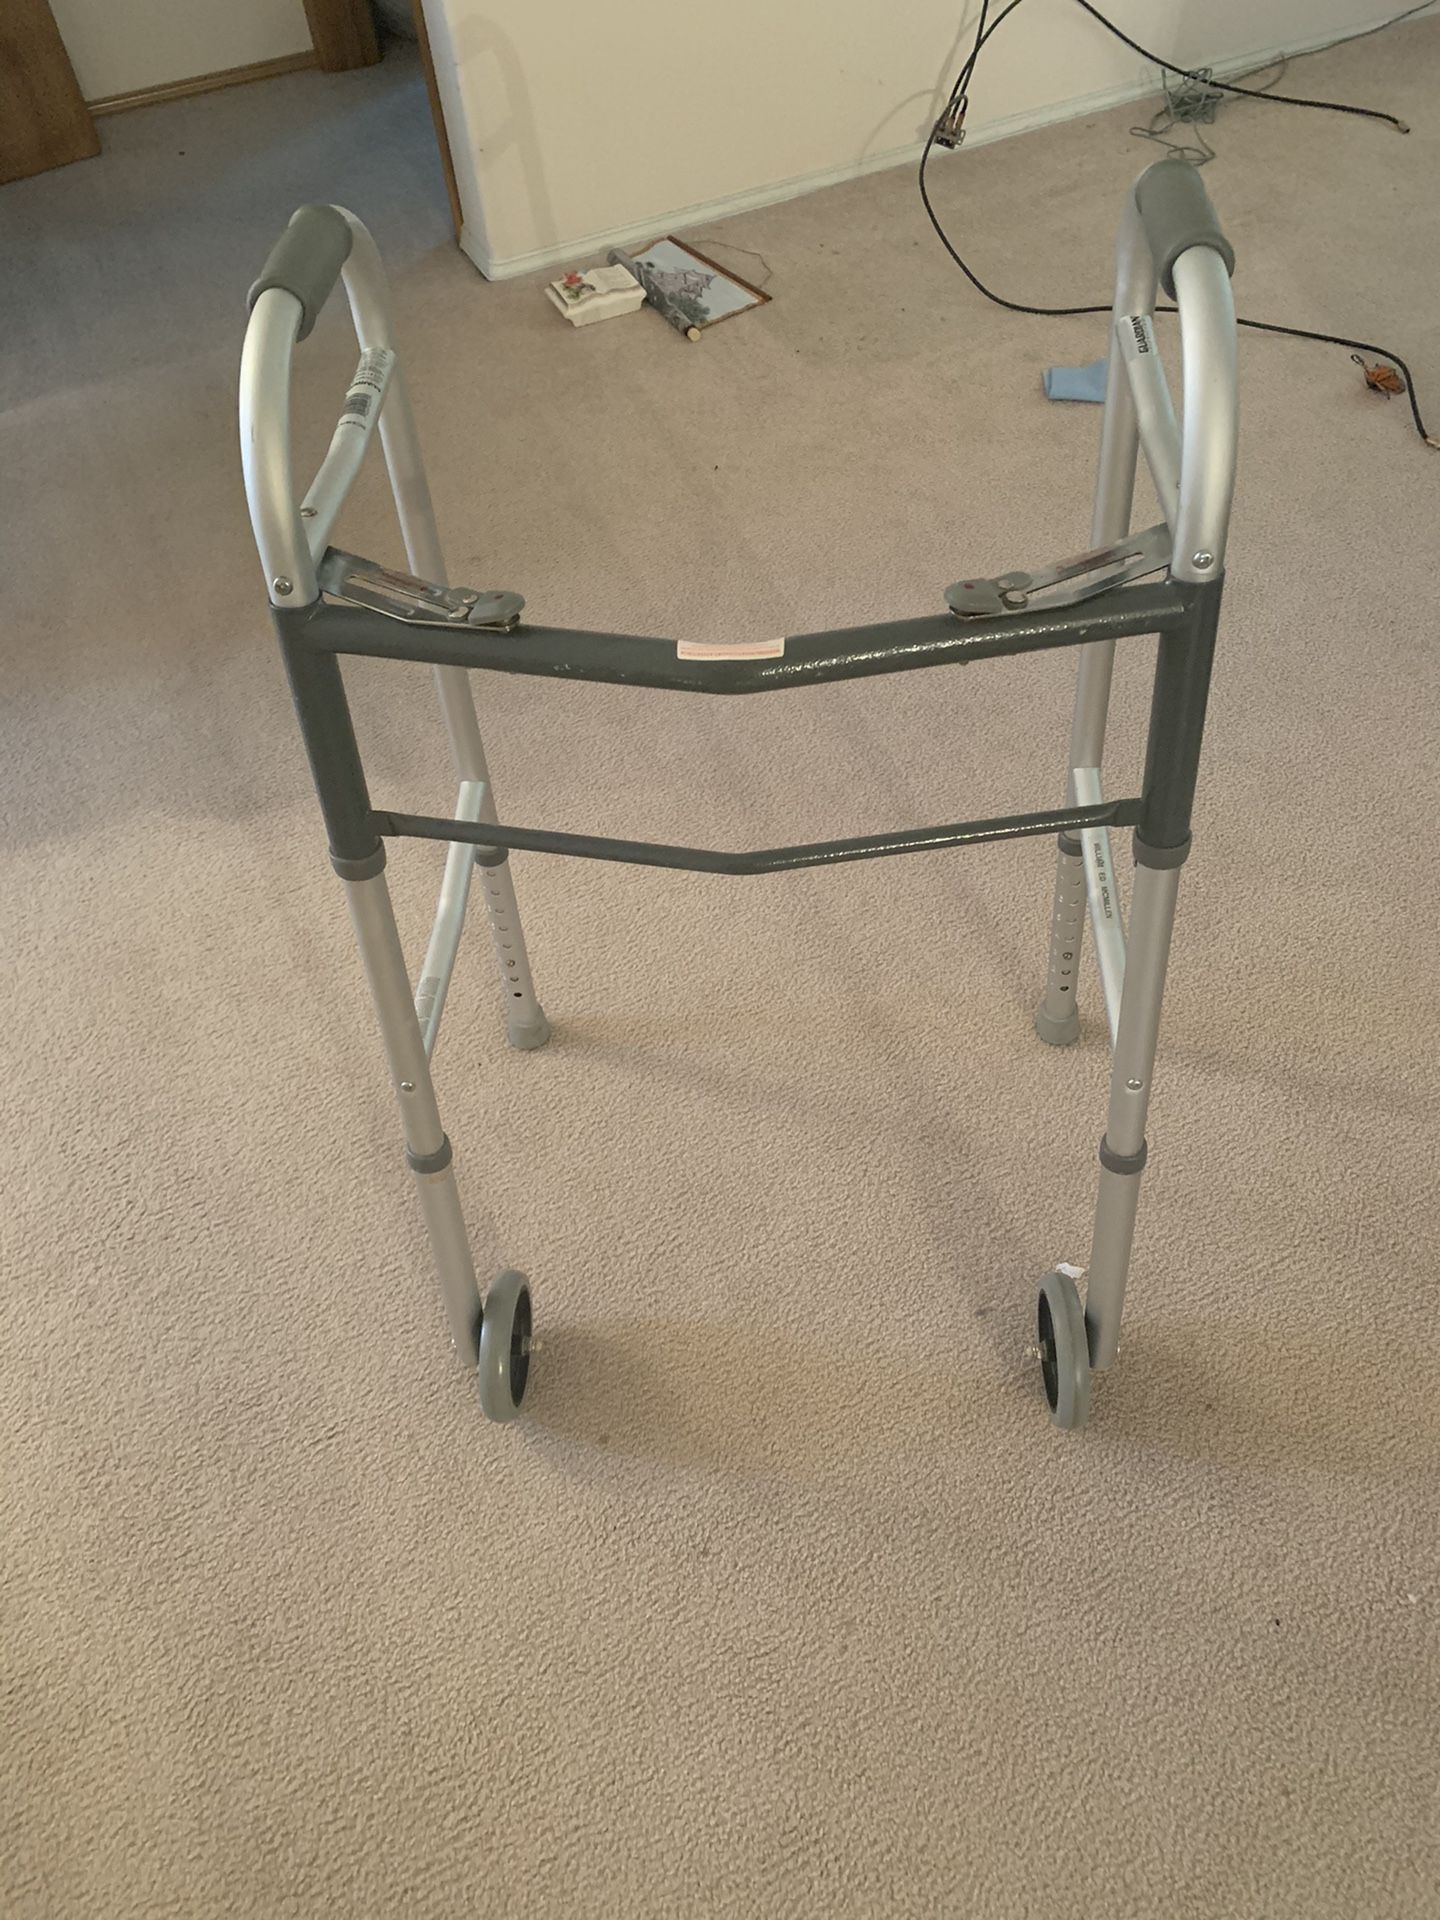 Walker for Seniors or surgery recovery. One with wheels $20 One without wheels $15